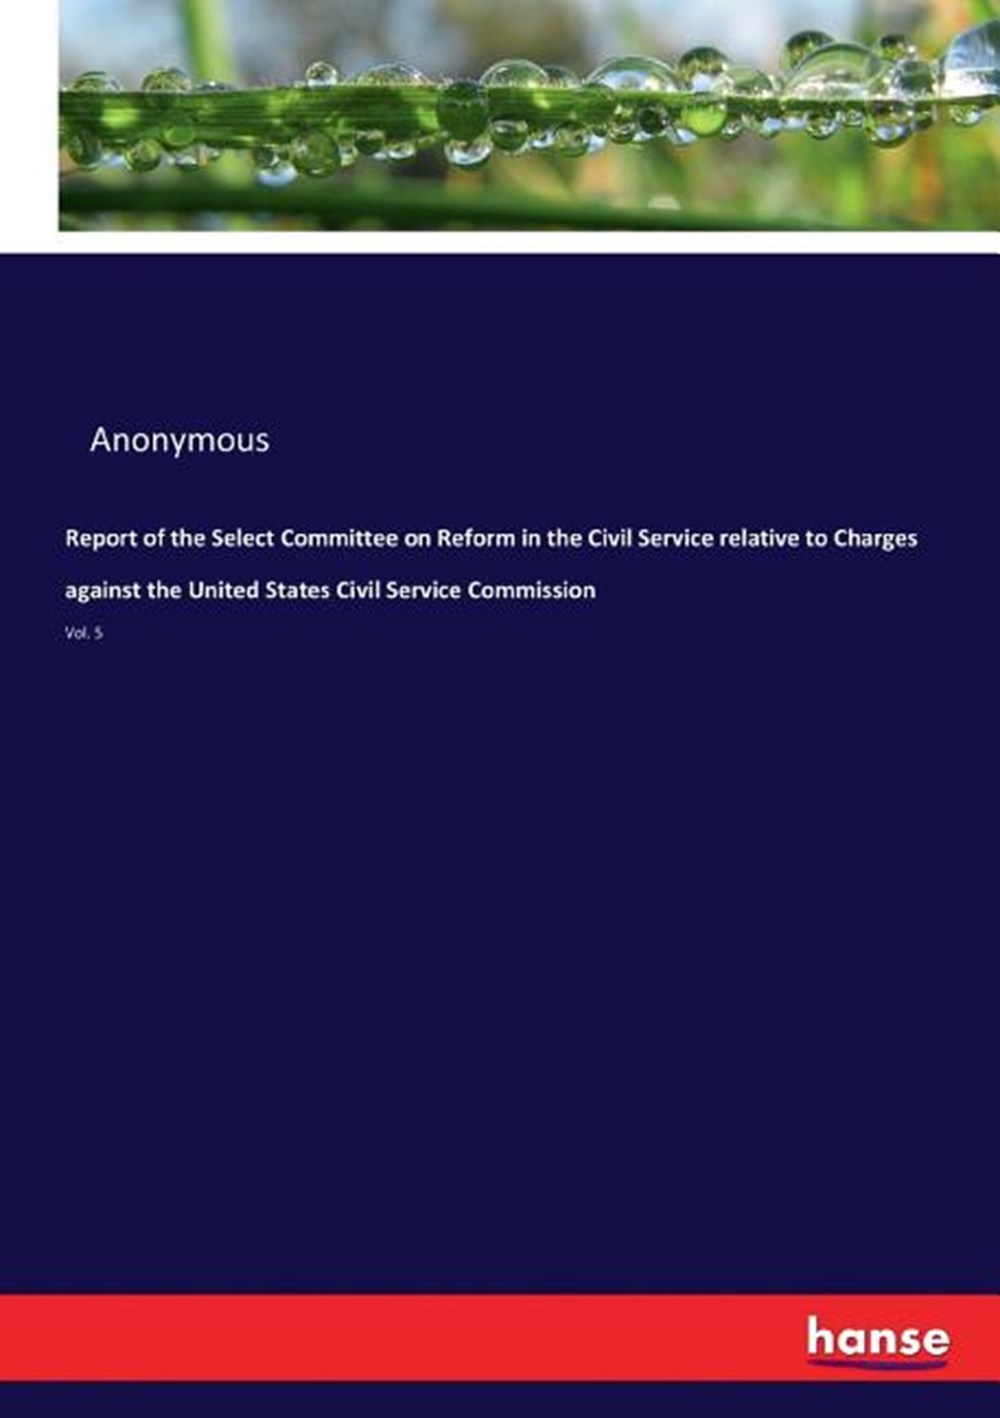 Report of the Select Committee on Reform in the Civil Service relative to Charges against the United